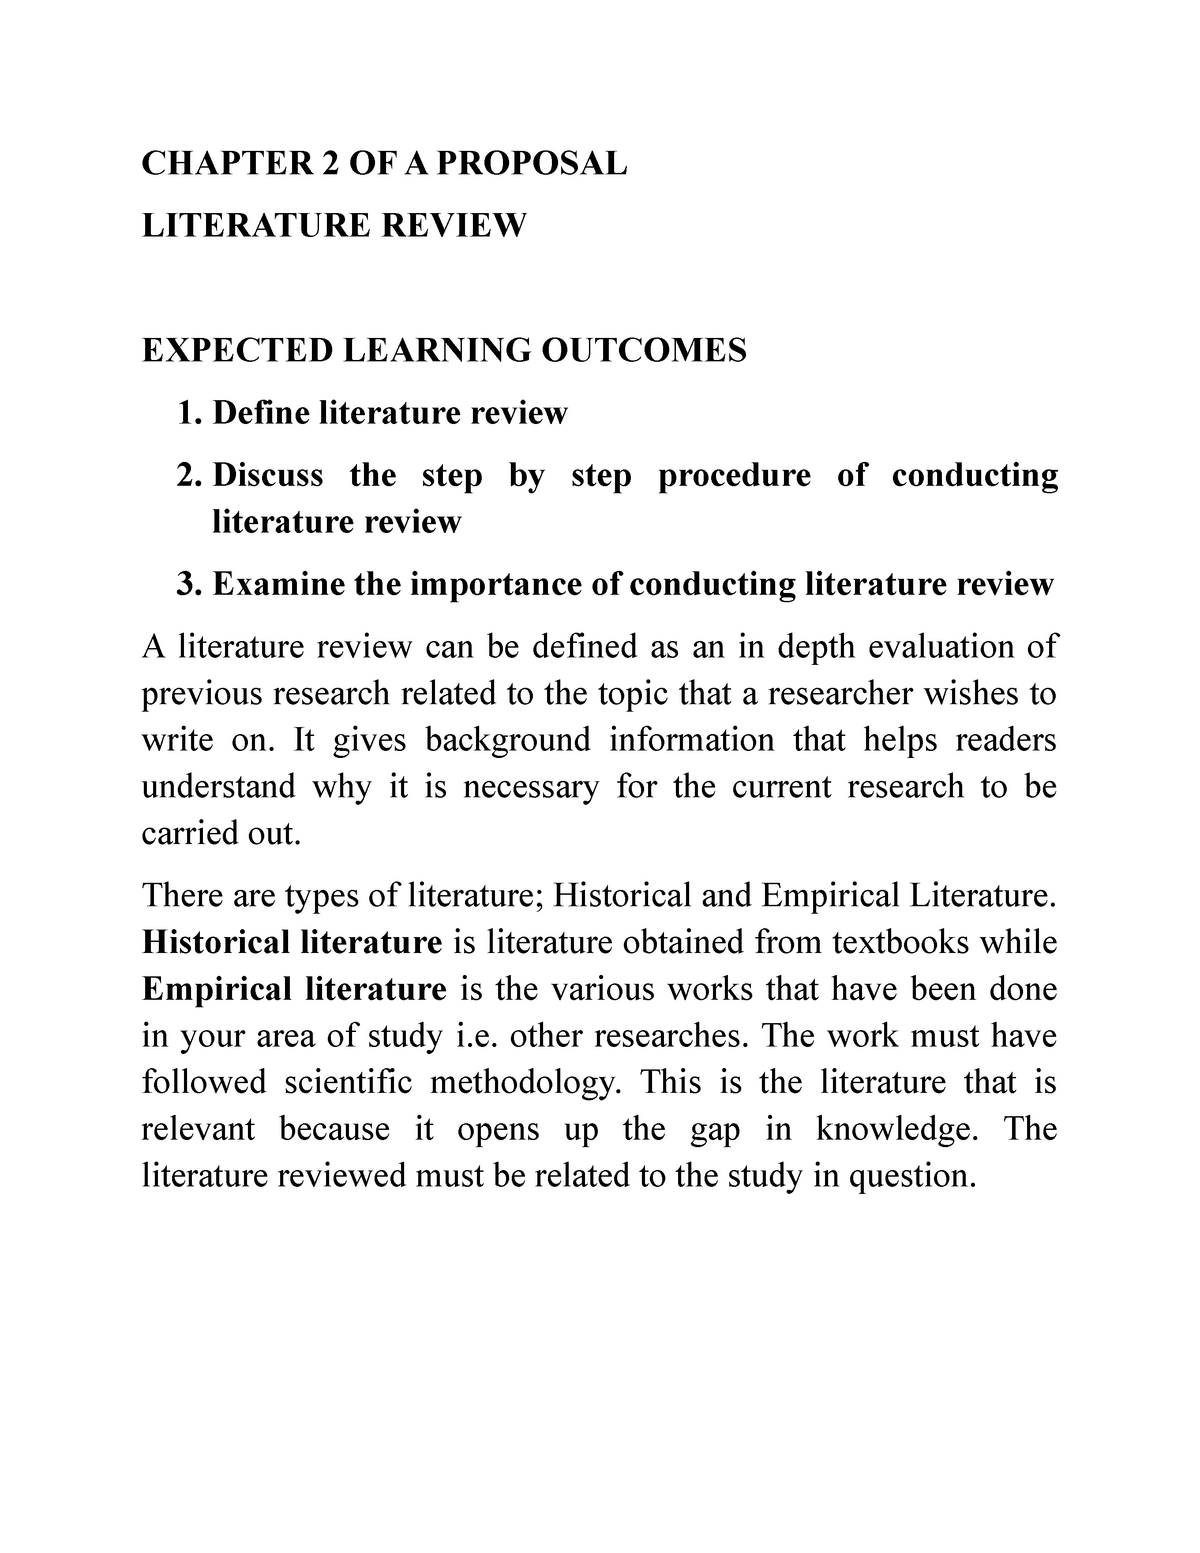 procedure for literature review